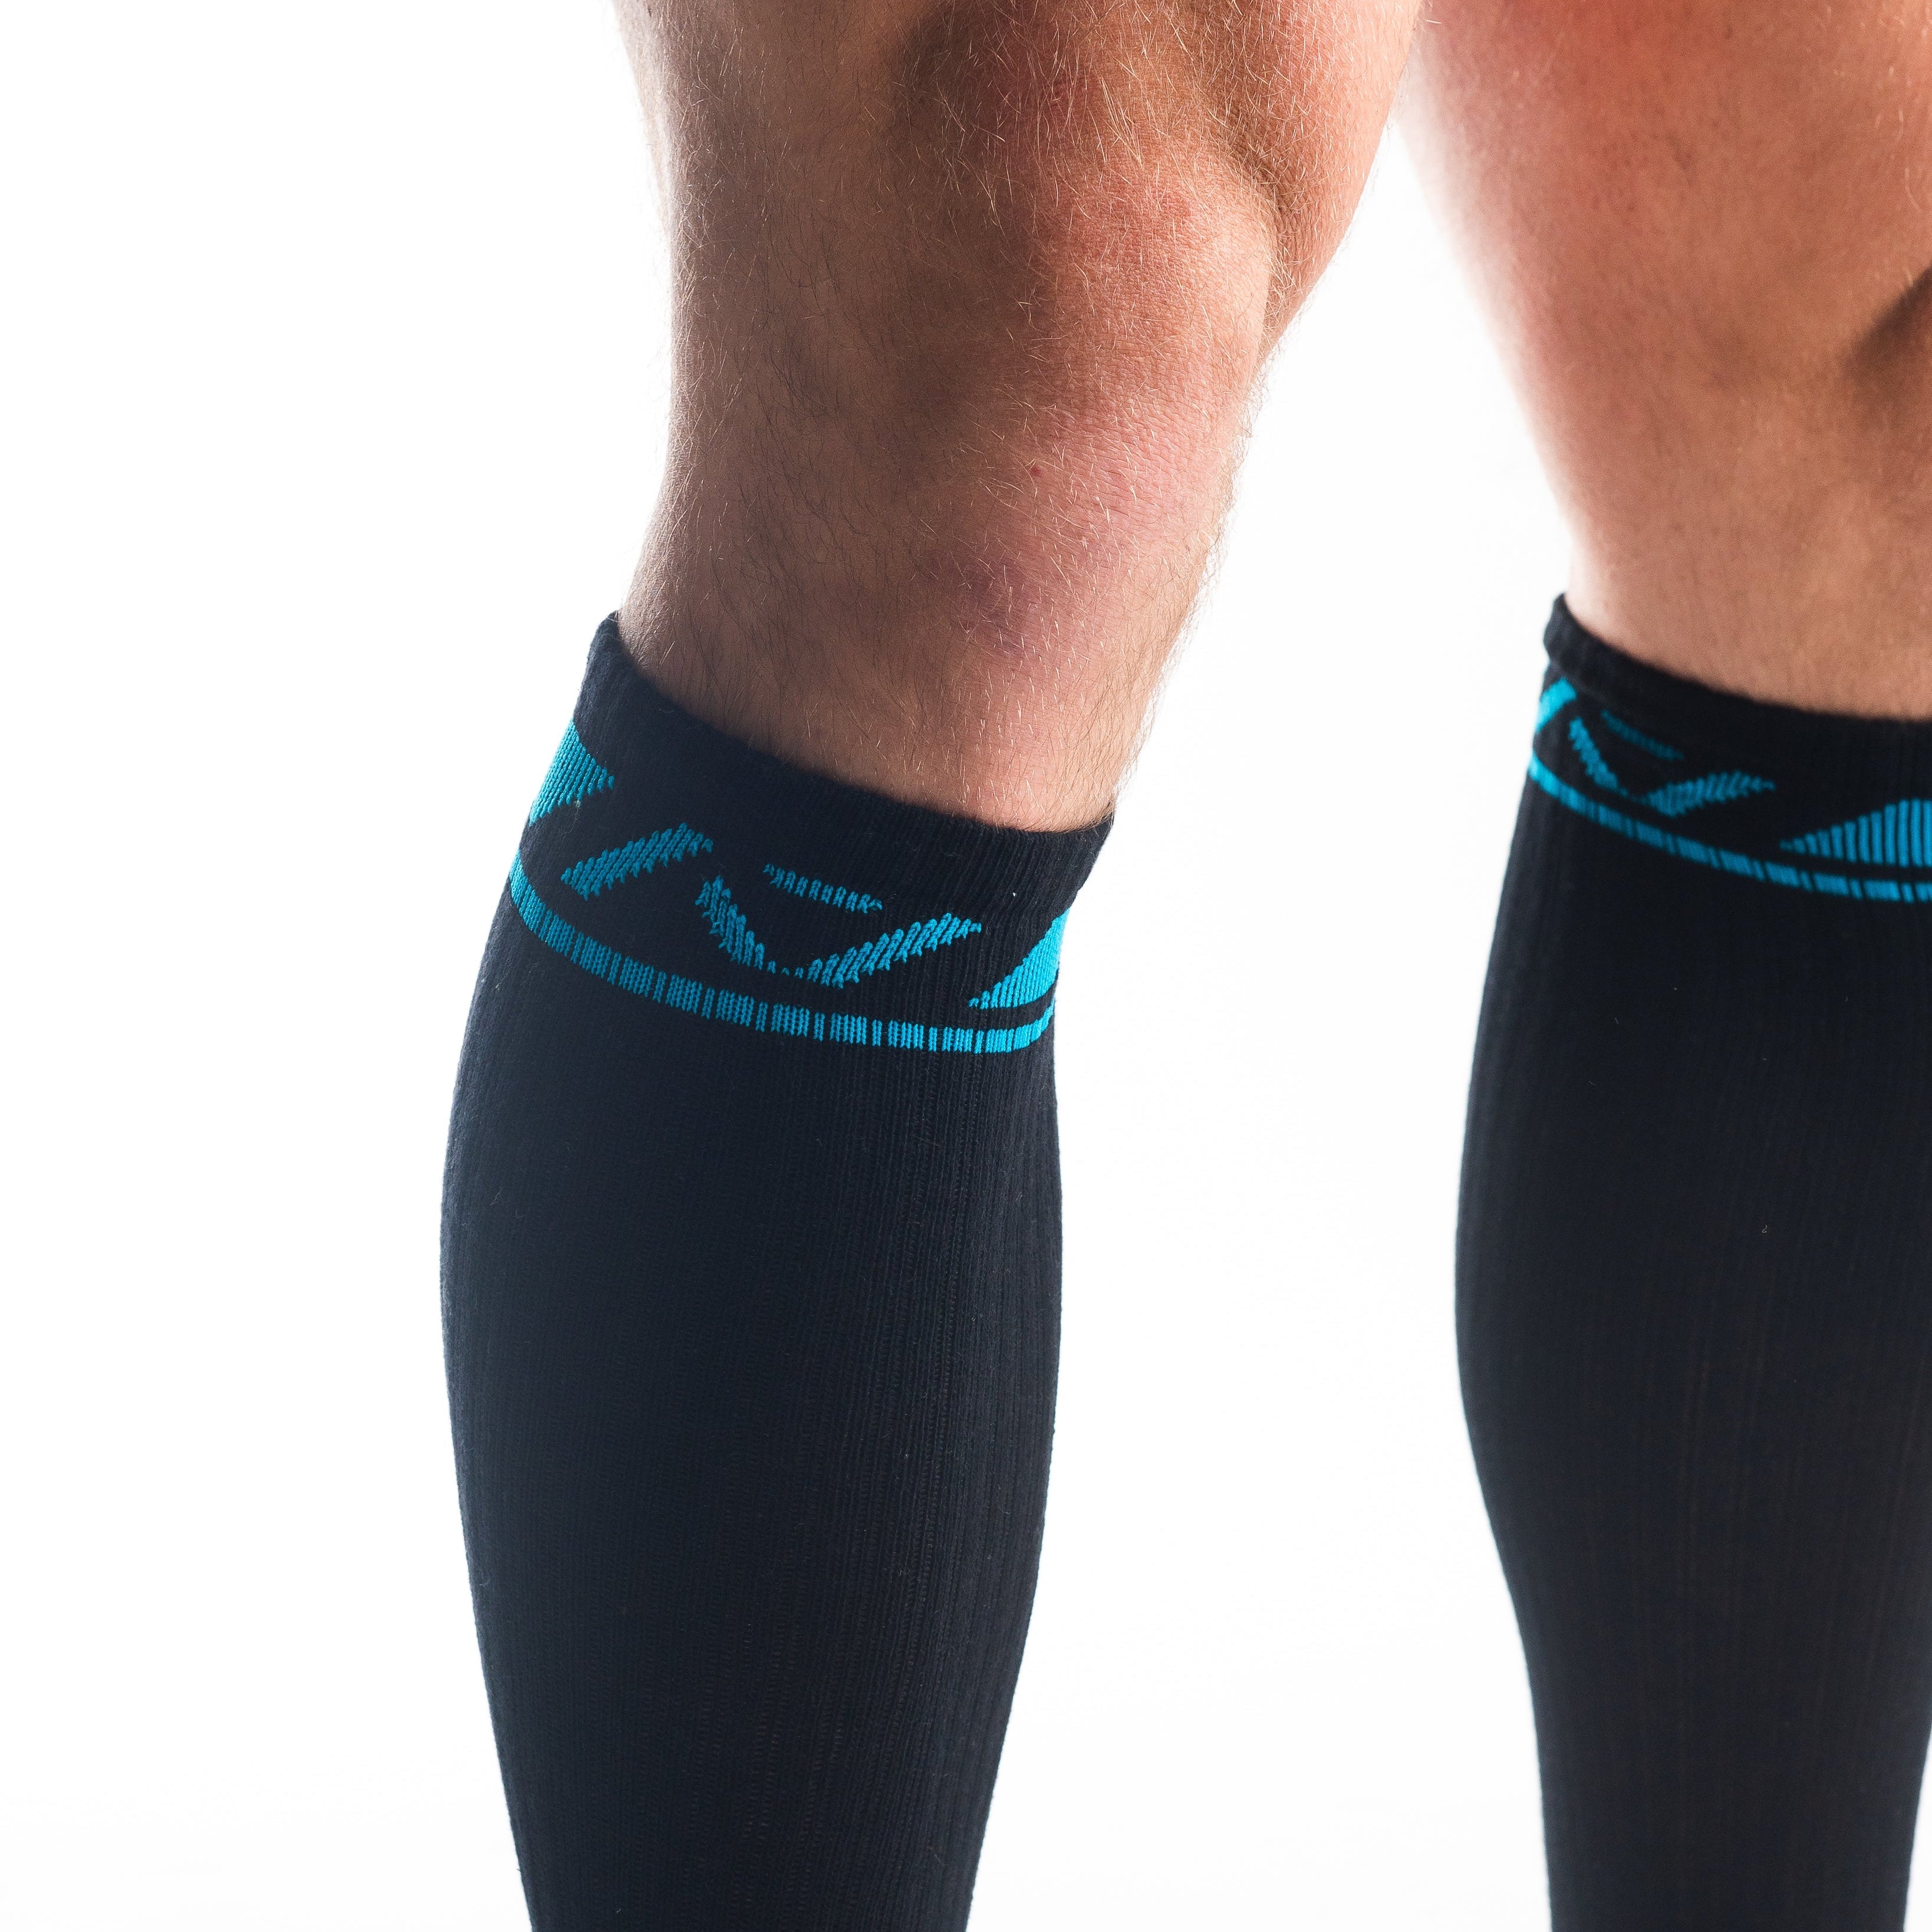 A7 Azul Deadlift socks are designed specifically for pulls and keep your shins protected from scrapes. A7 deadlift socks are a perfect pair to wear in training or powerlifting competition. The IPF Approved Kit includes Powerlifting Singlet, A7 Meet Shirt, A7 Zebra Wrist Wraps, A7 Deadlift Socks, Hourglass Knee Sleeves (Stiff Knee Sleeves and Rigor Mortis Knee Sleeves). Genouillères powerlifting shipping to France, Spain, Ireland, Germany, Italy, Sweden and EU.